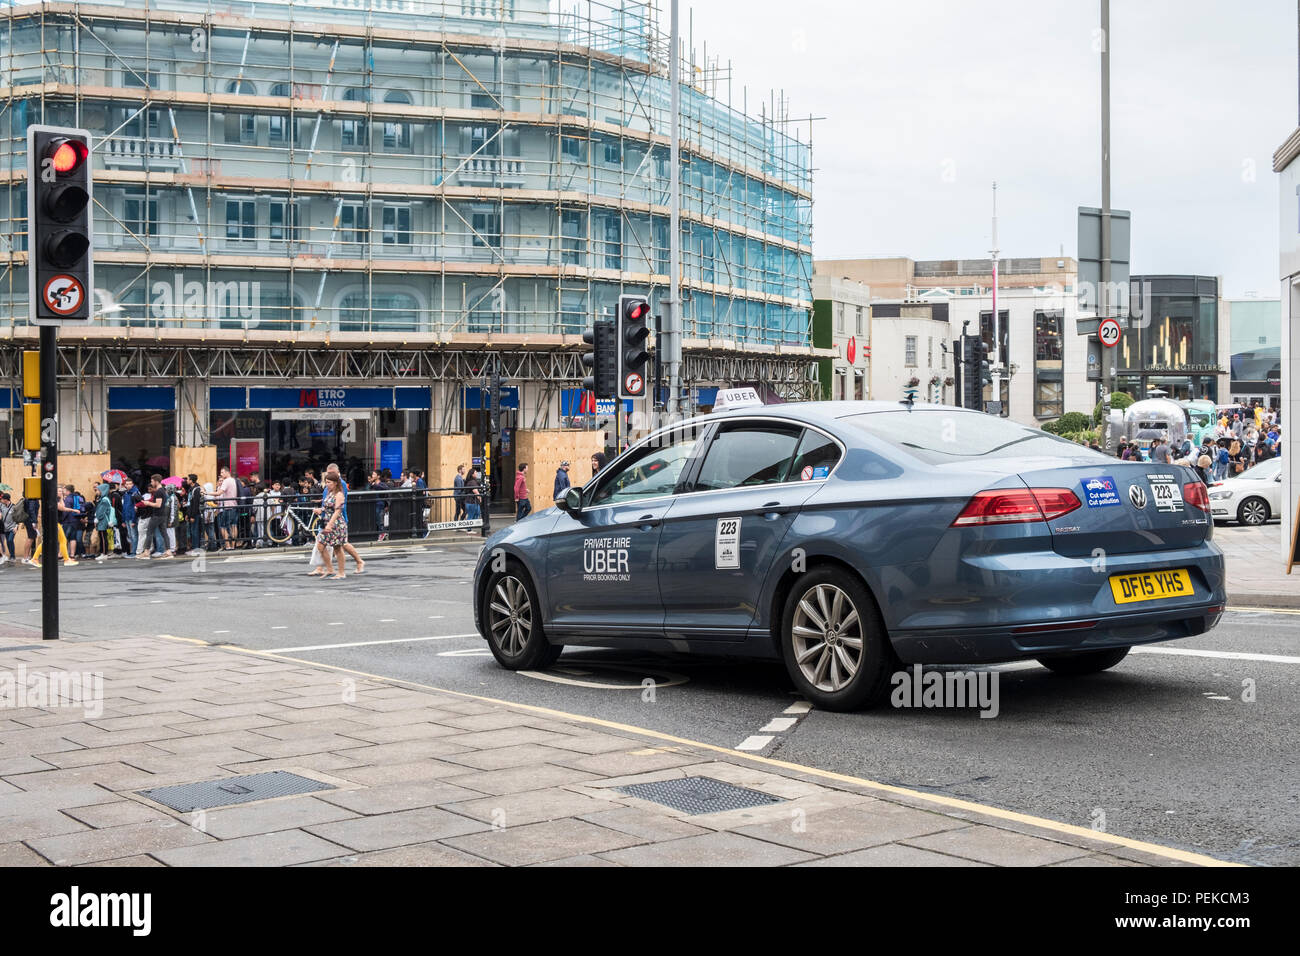 Uber taxi cab minicab on a UK street. Stock Photo